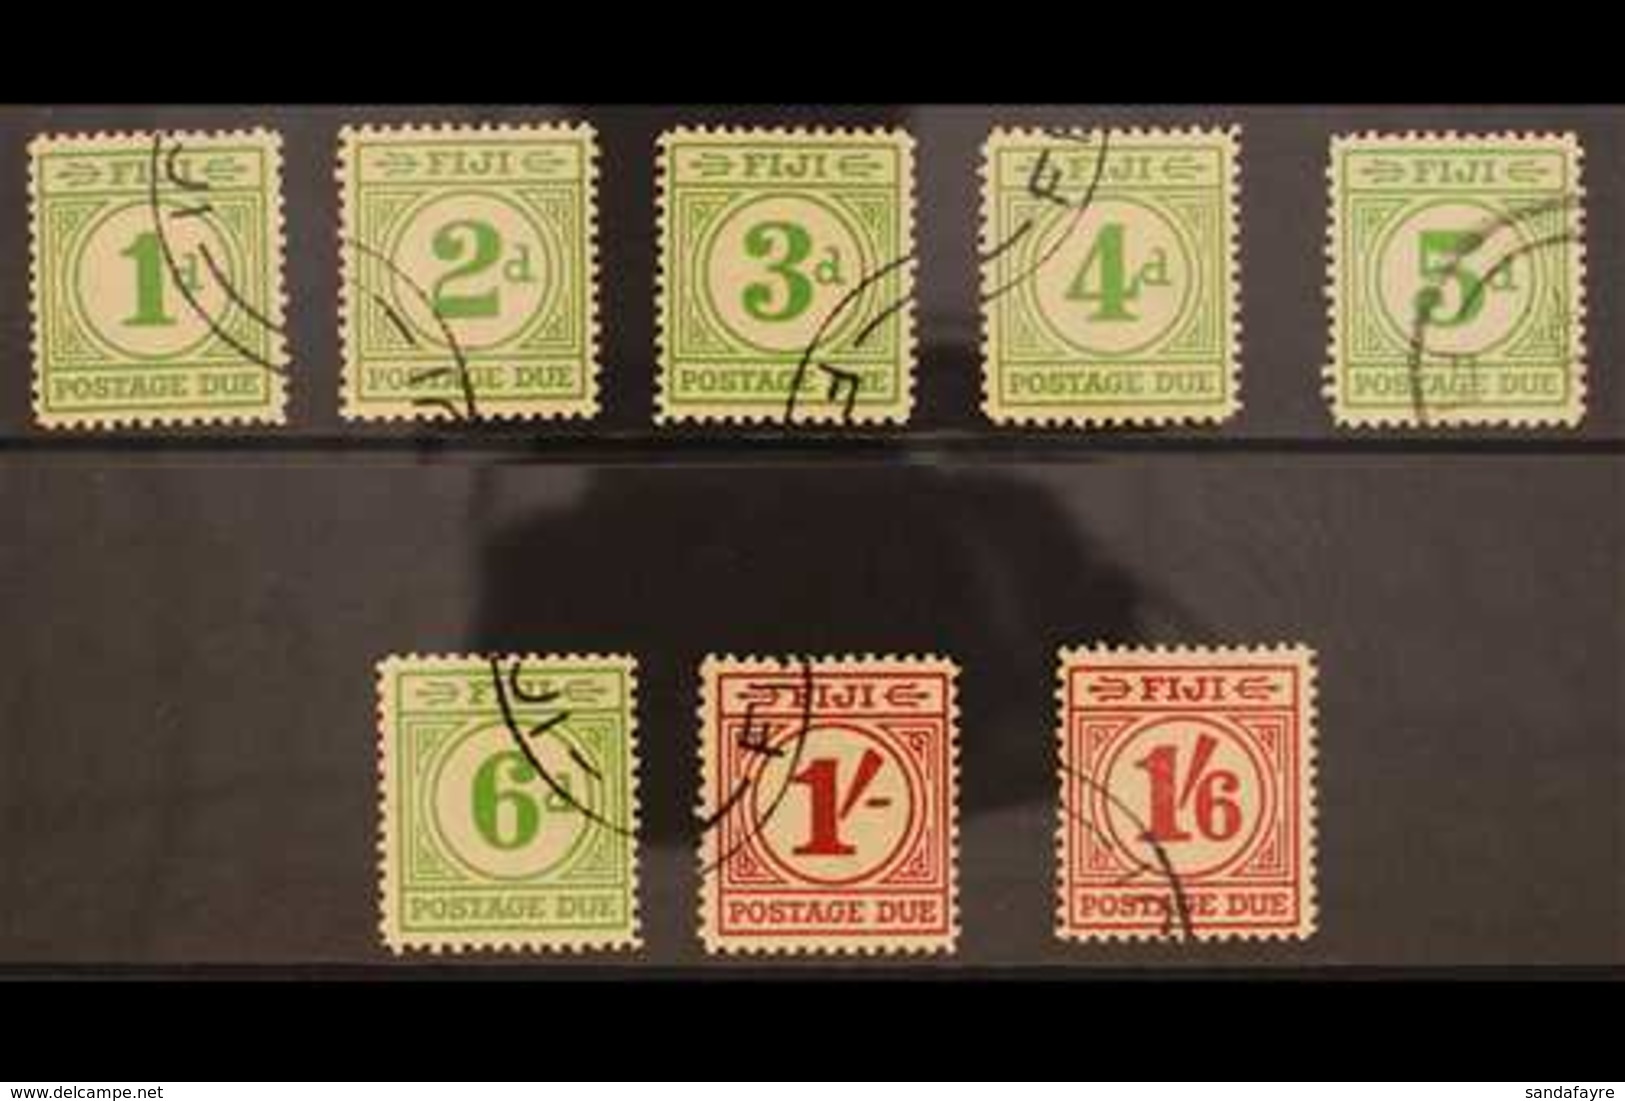 POSTAGE DUES 1940 Emerald And Carmine Set, SG D11/17, Very Fine Used. Cto As Usual, 1s And 1s 6d With RPS Certificates.  - Fiji (...-1970)